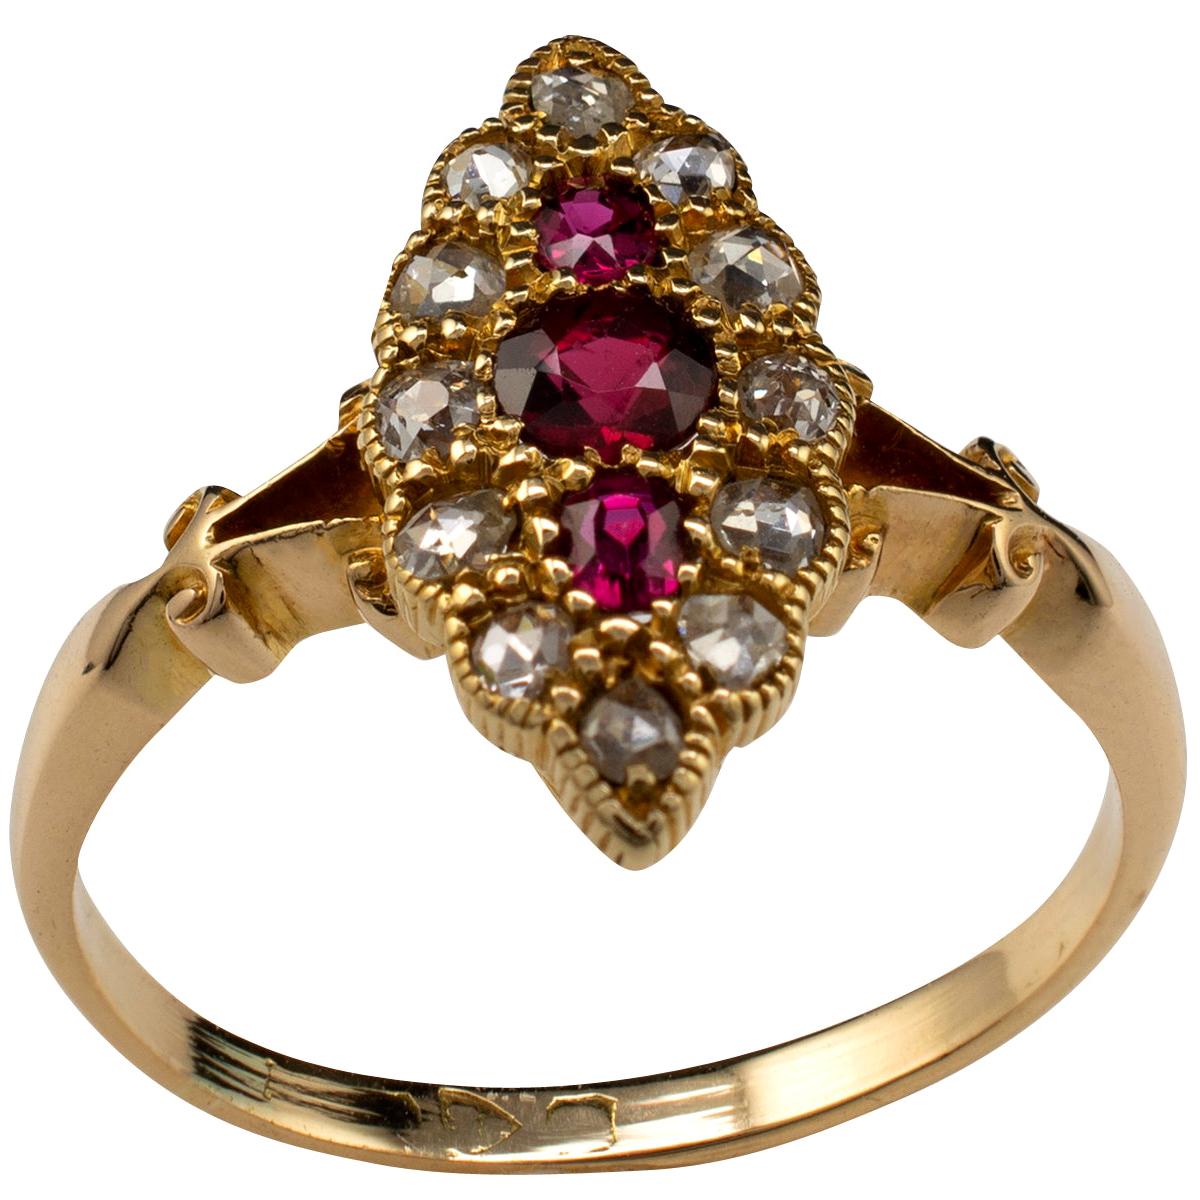 Antique Marquise Ring Ruby and Diamond Ring, 18 Karat Gold Chester Hallmarks